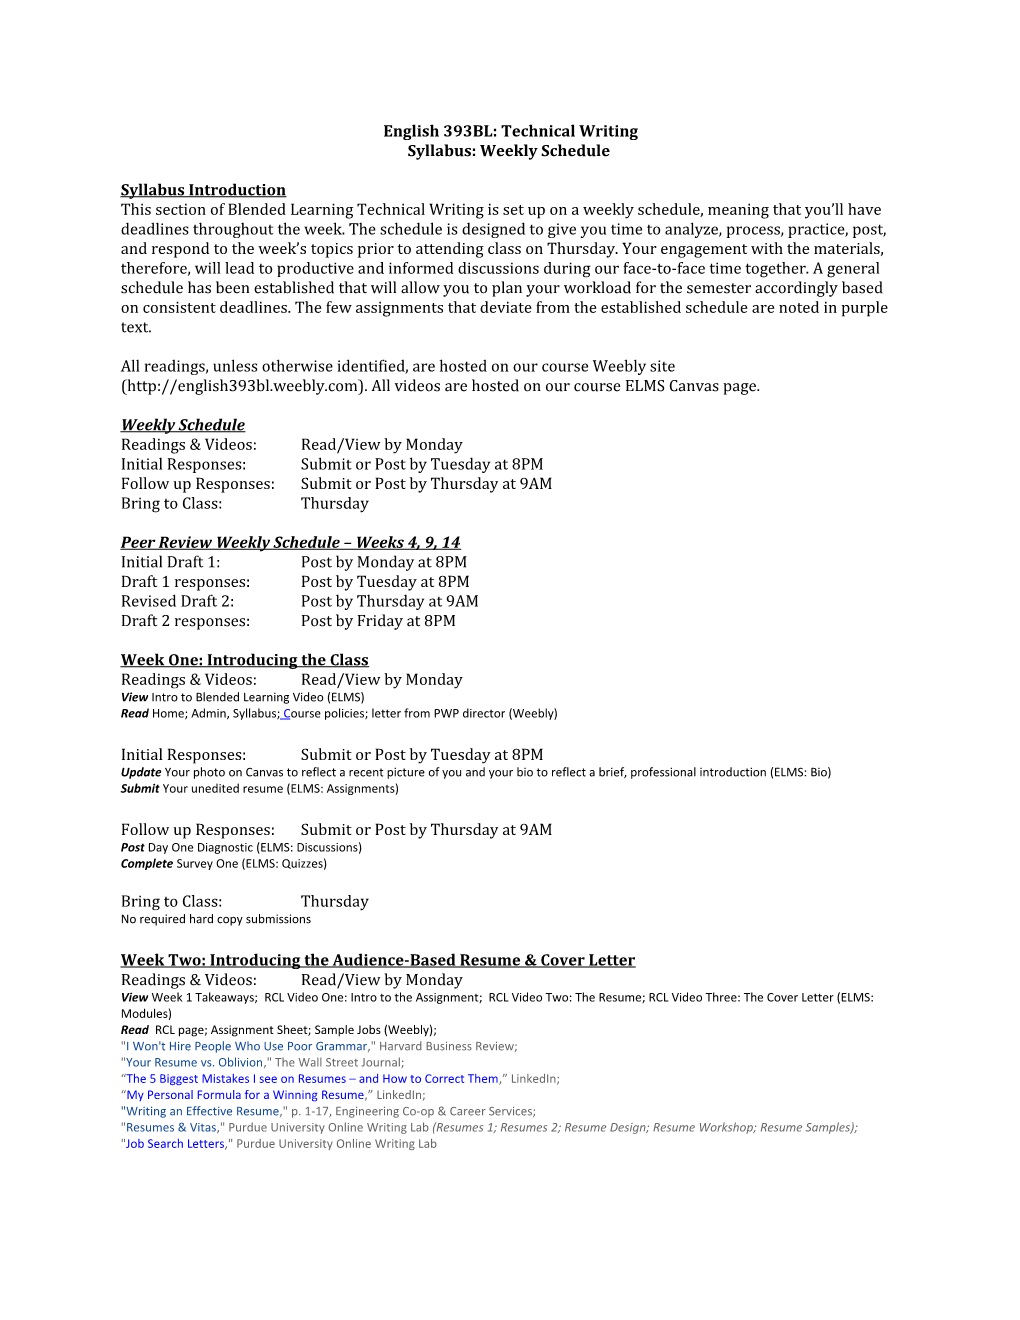 English 393BL: Technical Writing Syllabus: Weekly Schedule